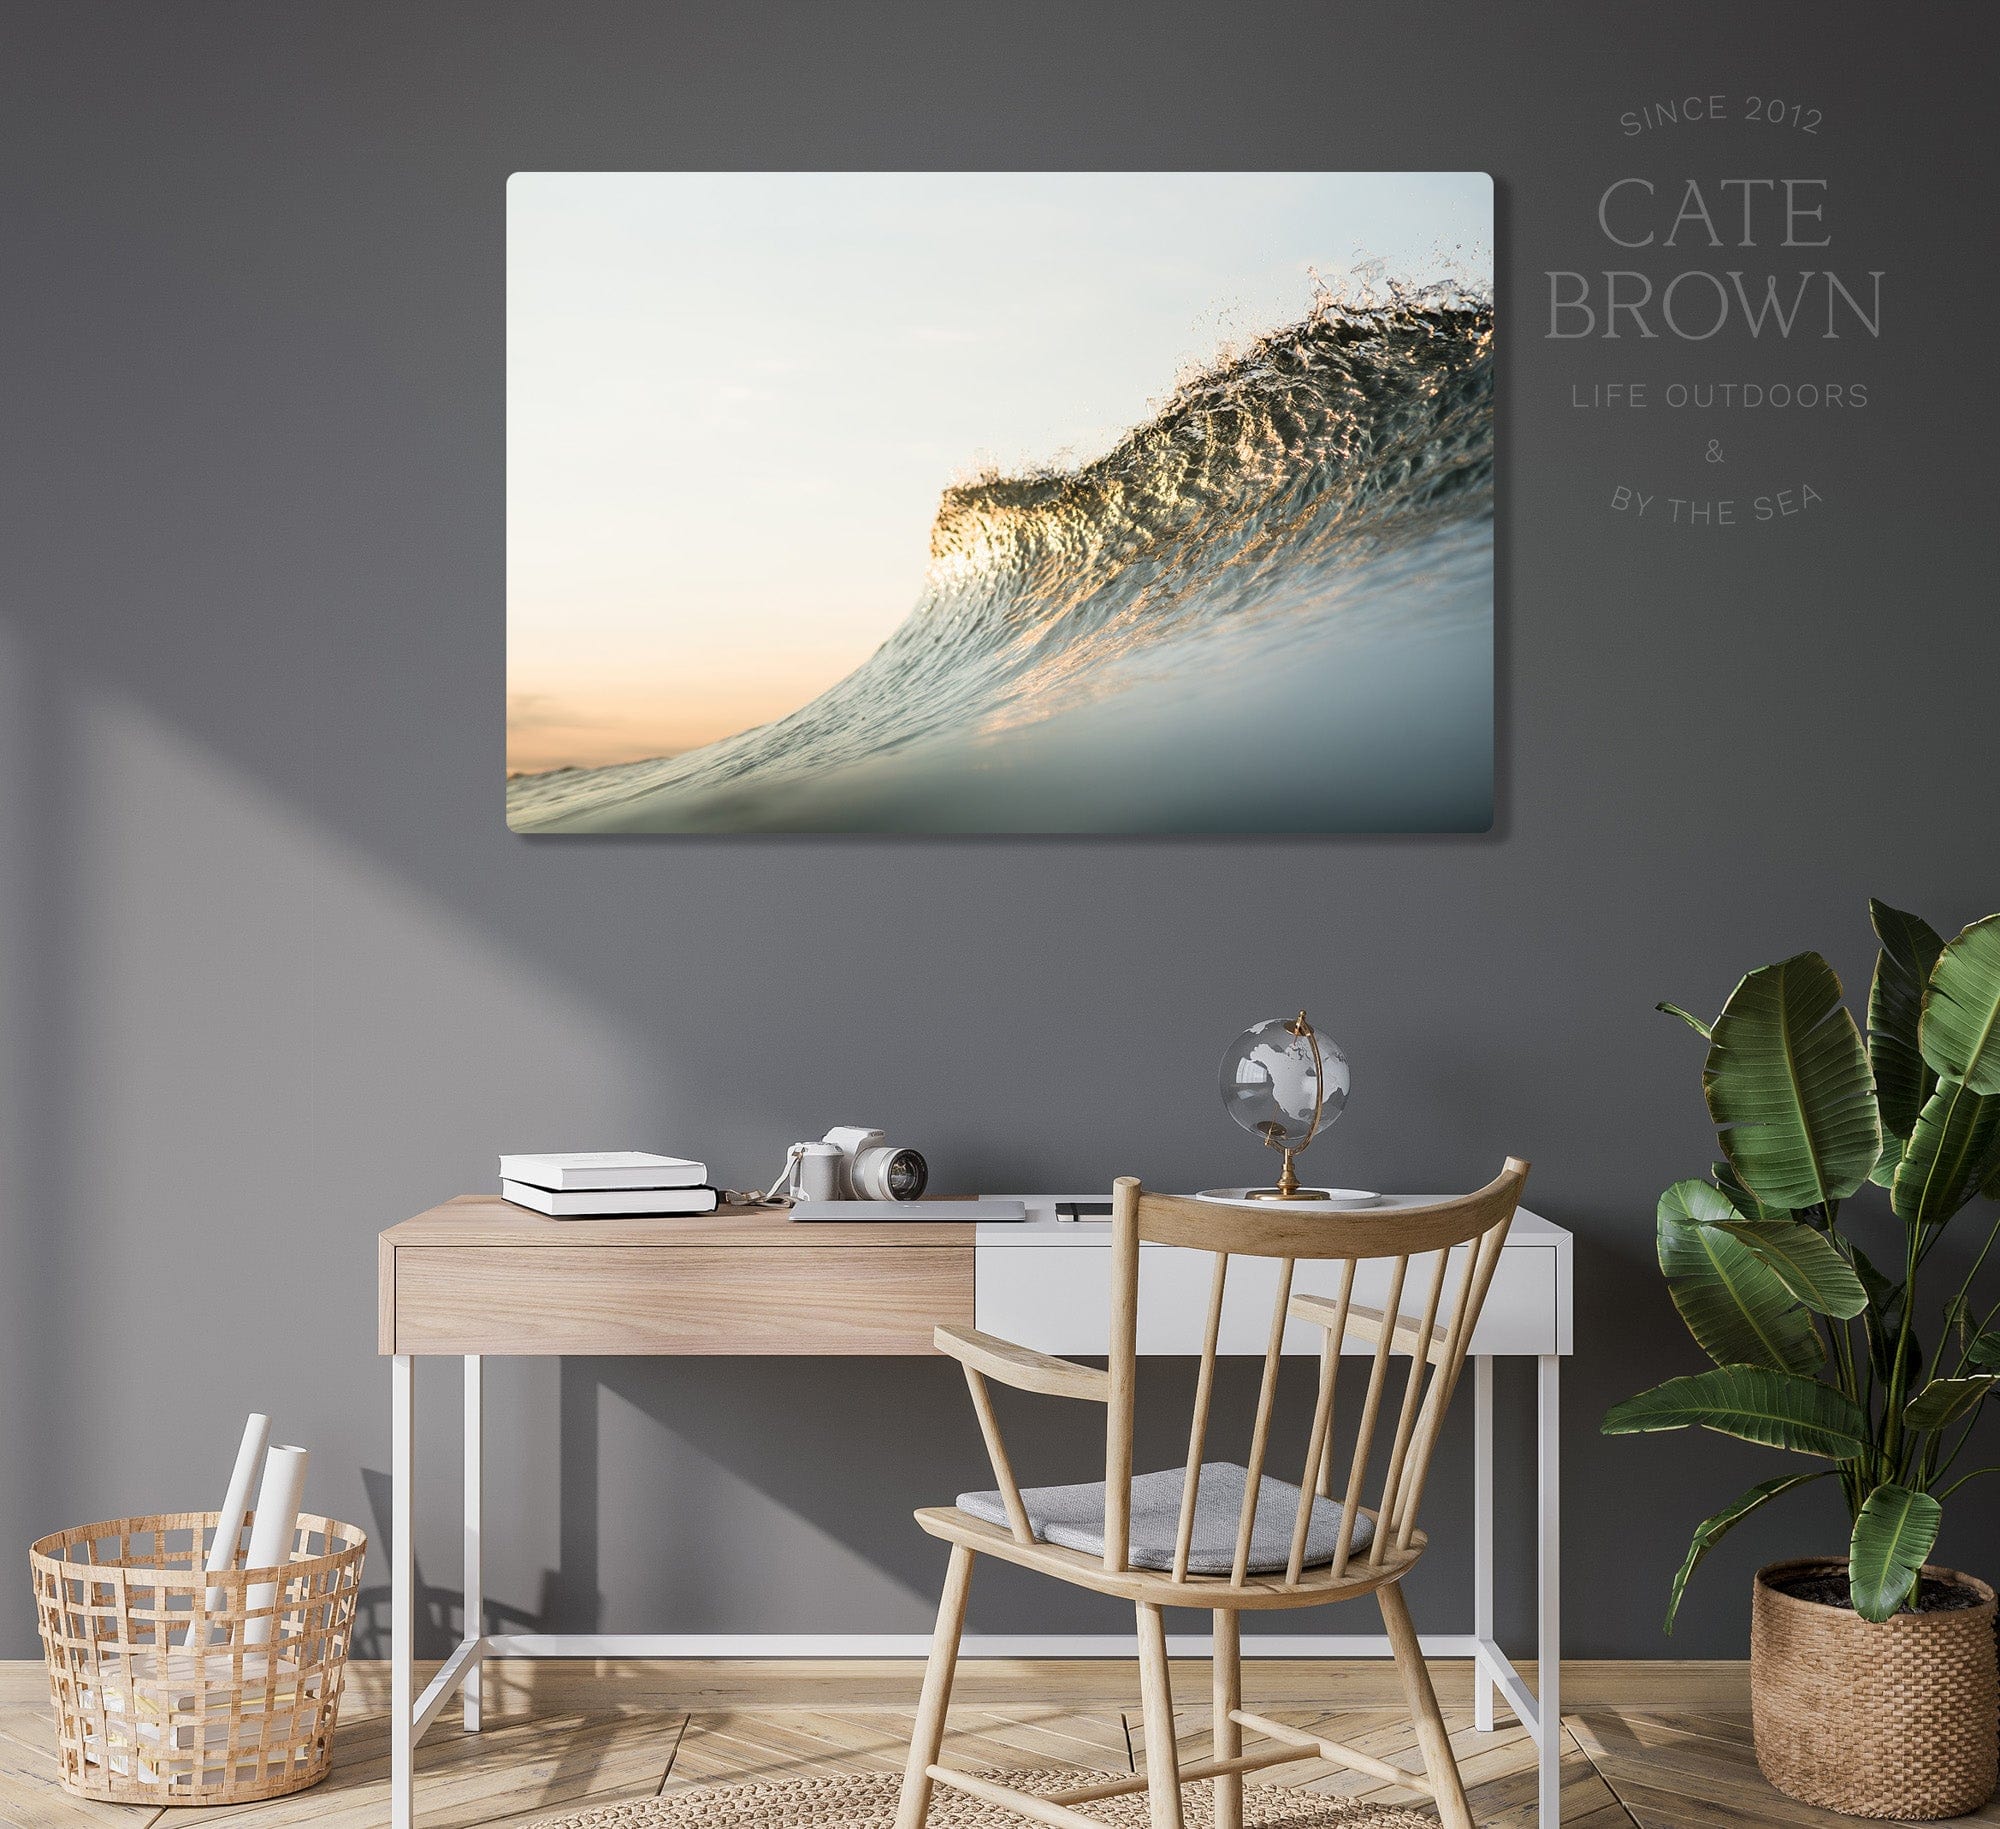 Cate Brown Photo Canvas / 16"x24" / None (Print Only) Mercurial  //  Ocean Photography Made to Order Ocean Fine Art